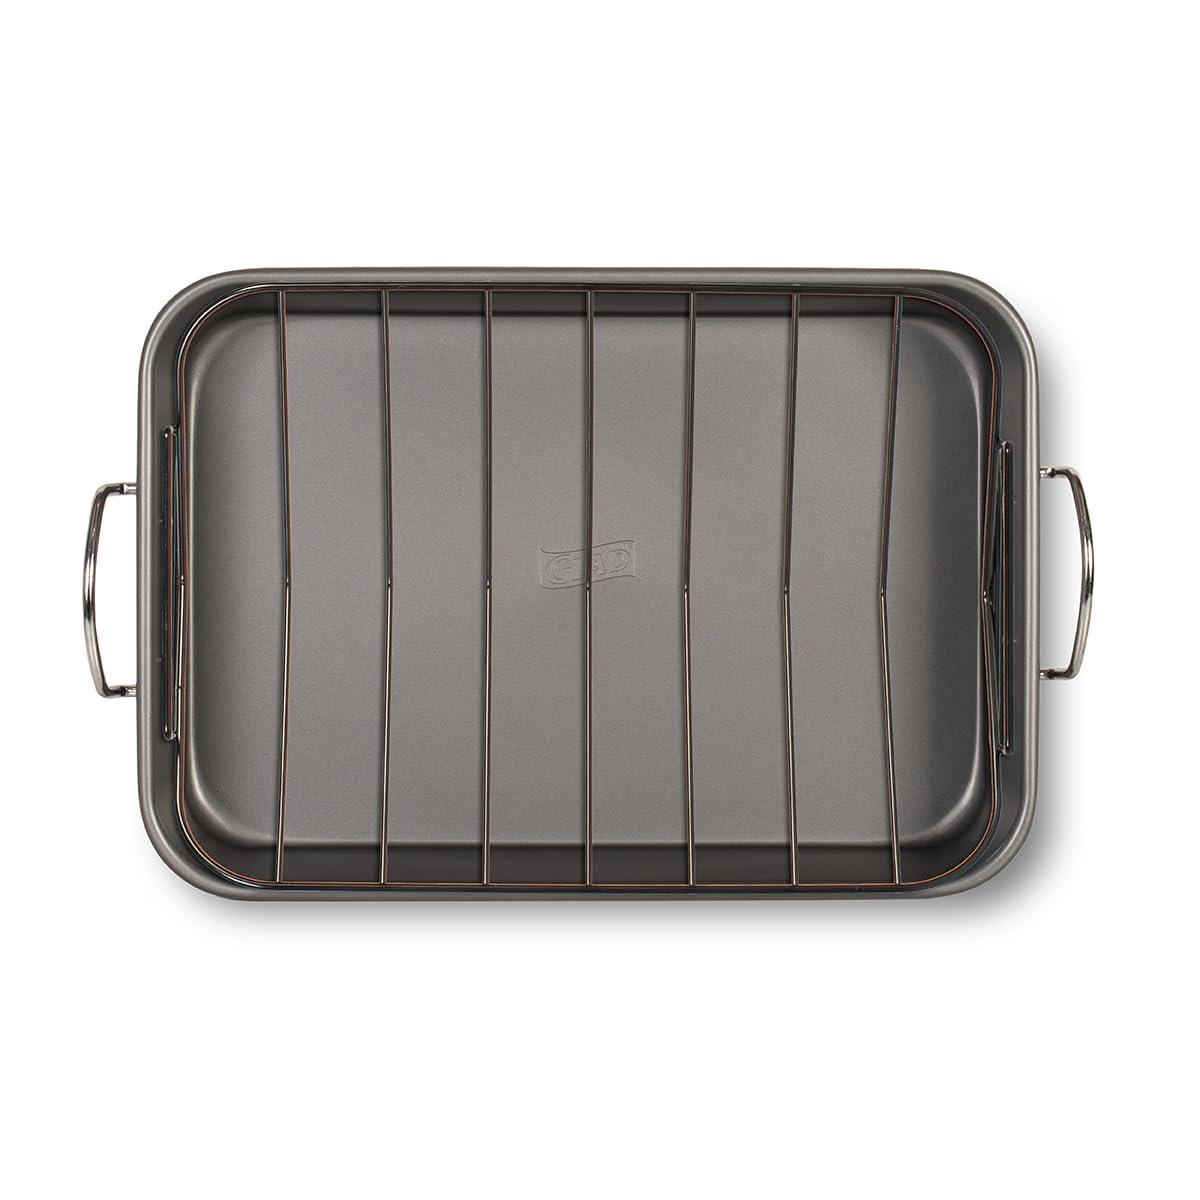 Glad Roasting Pan Nonstick 11x15 - Heavy Duty Metal Bakeware Dish with Rack - Large Oven Roaster Tray for Baking Turkey, Chicken, and Veggies - CookCave